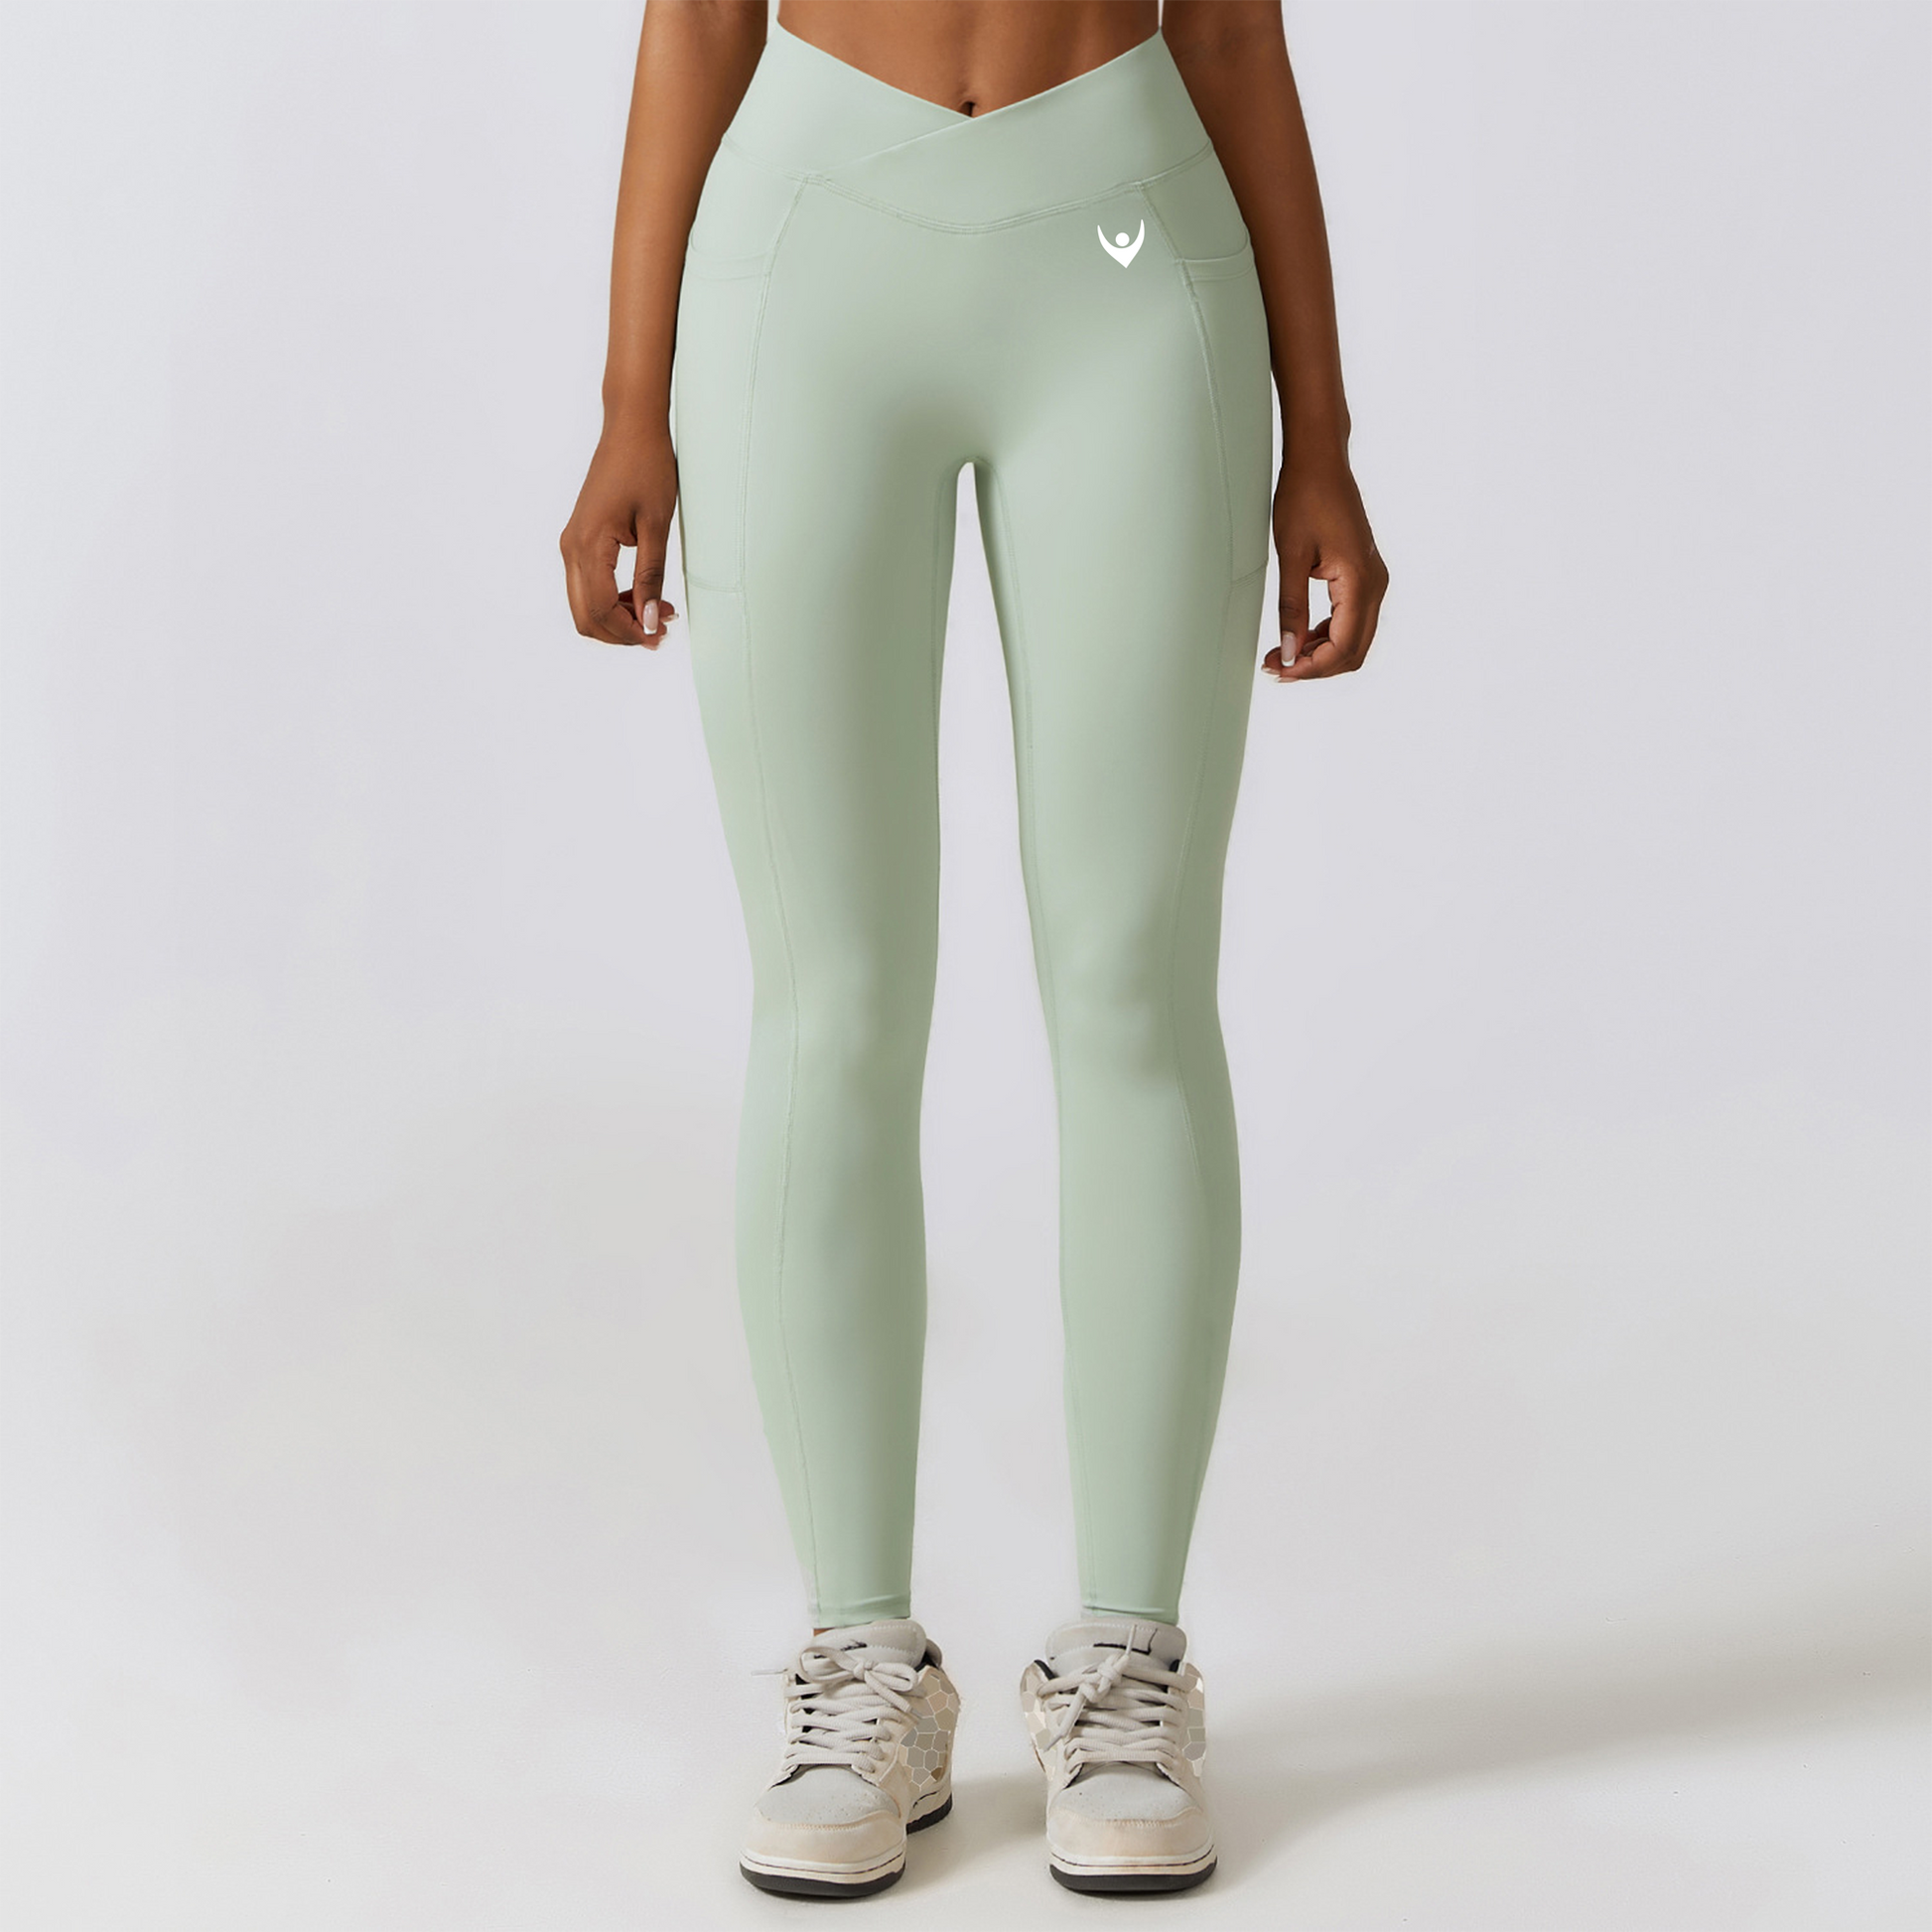 Quick Dry High Waist Yuna Fit Leggings For Running, Gym, Outdoor Fitness  And Workout Loose Fit Sweatpants Style #230317 From Kong003, $24.61